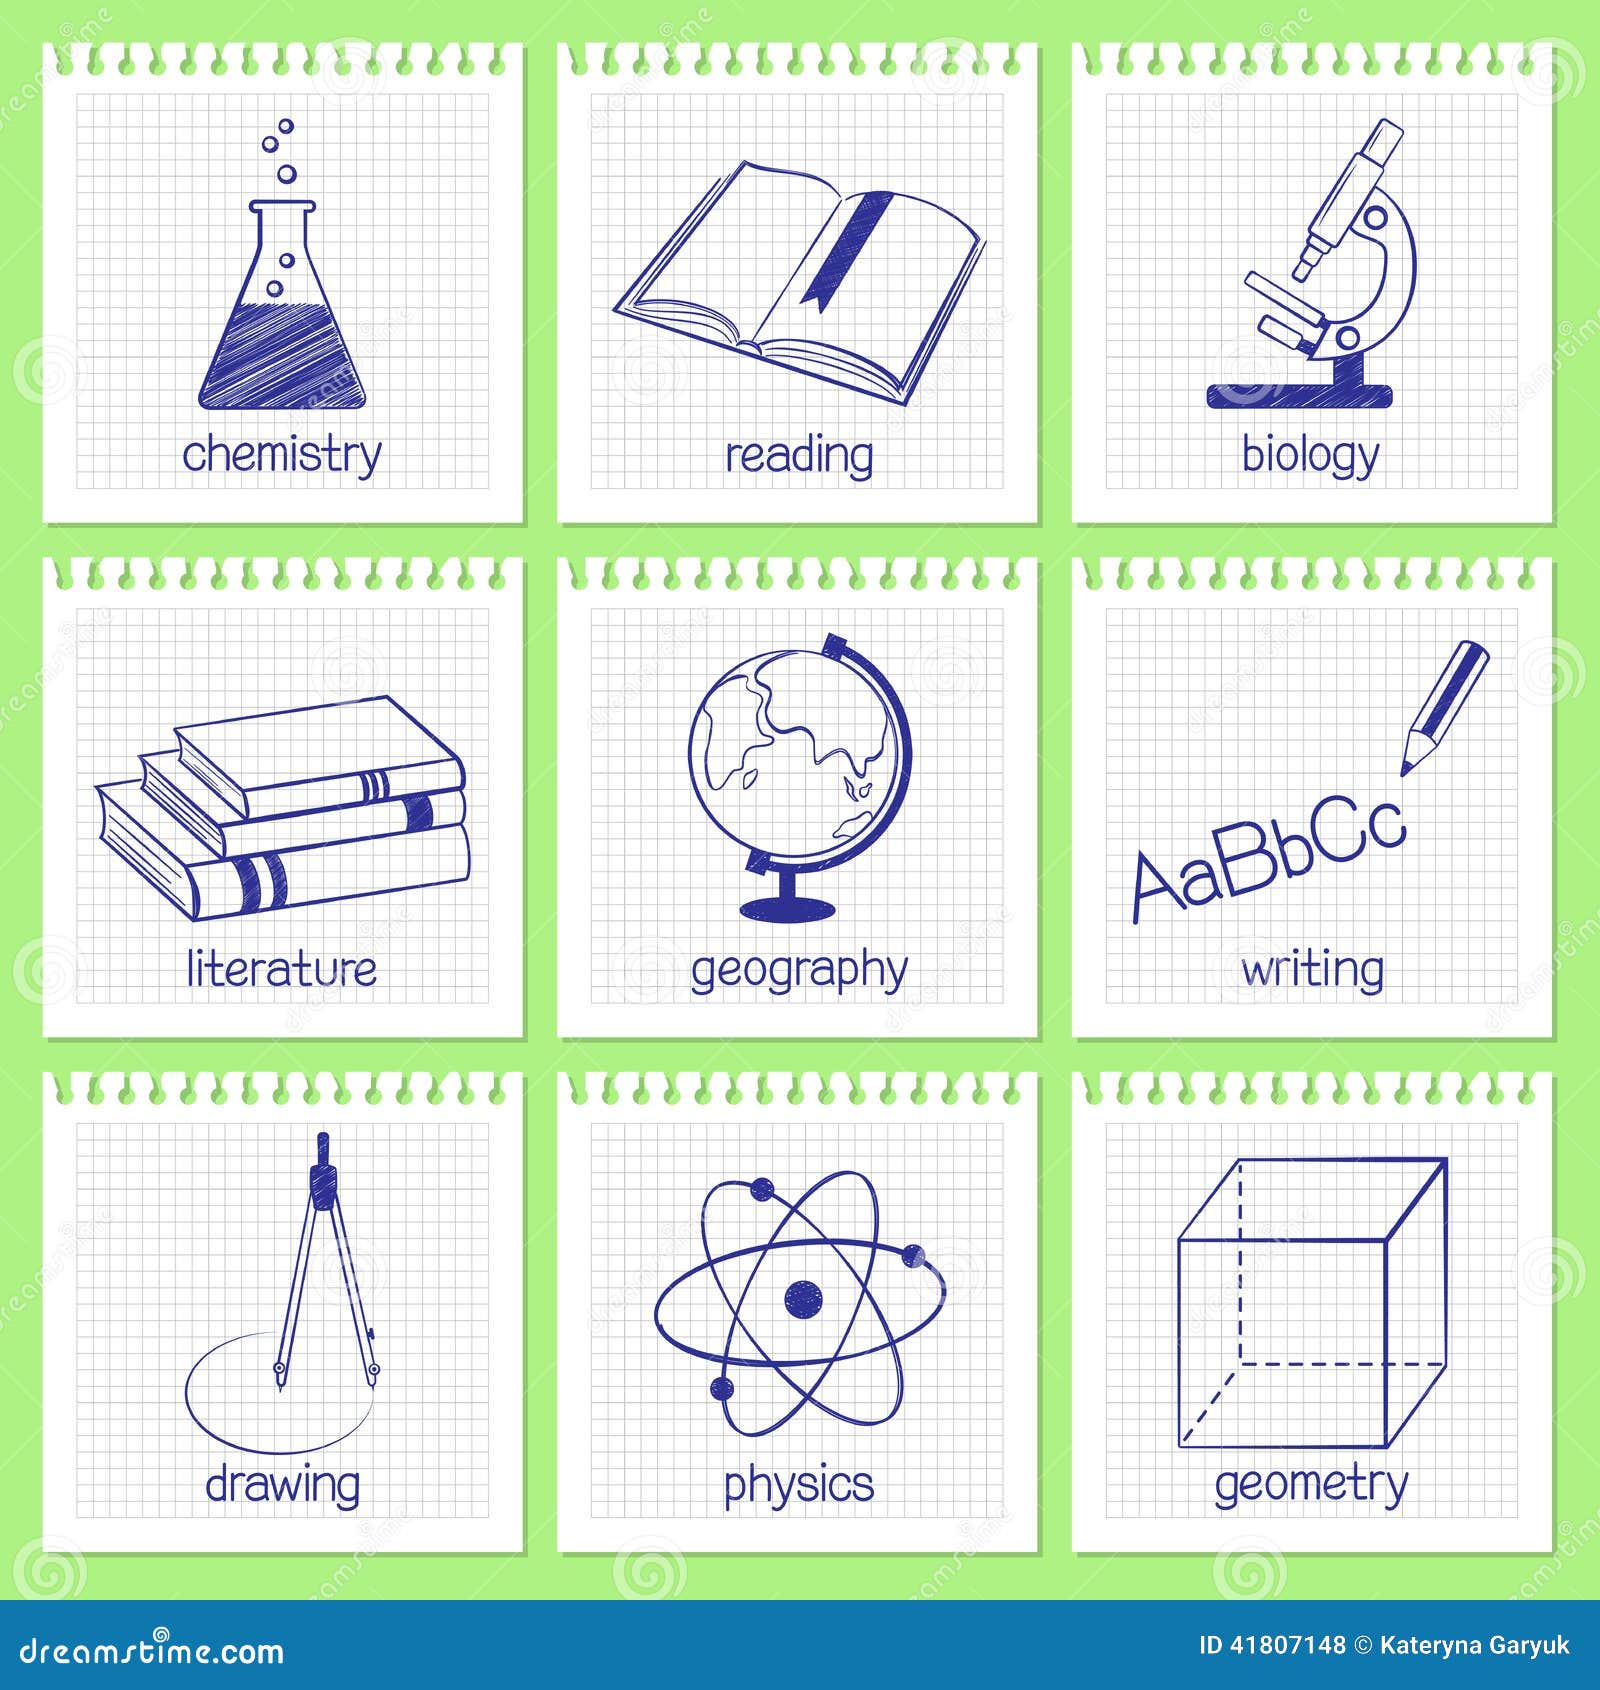 free clipart school subjects - photo #16